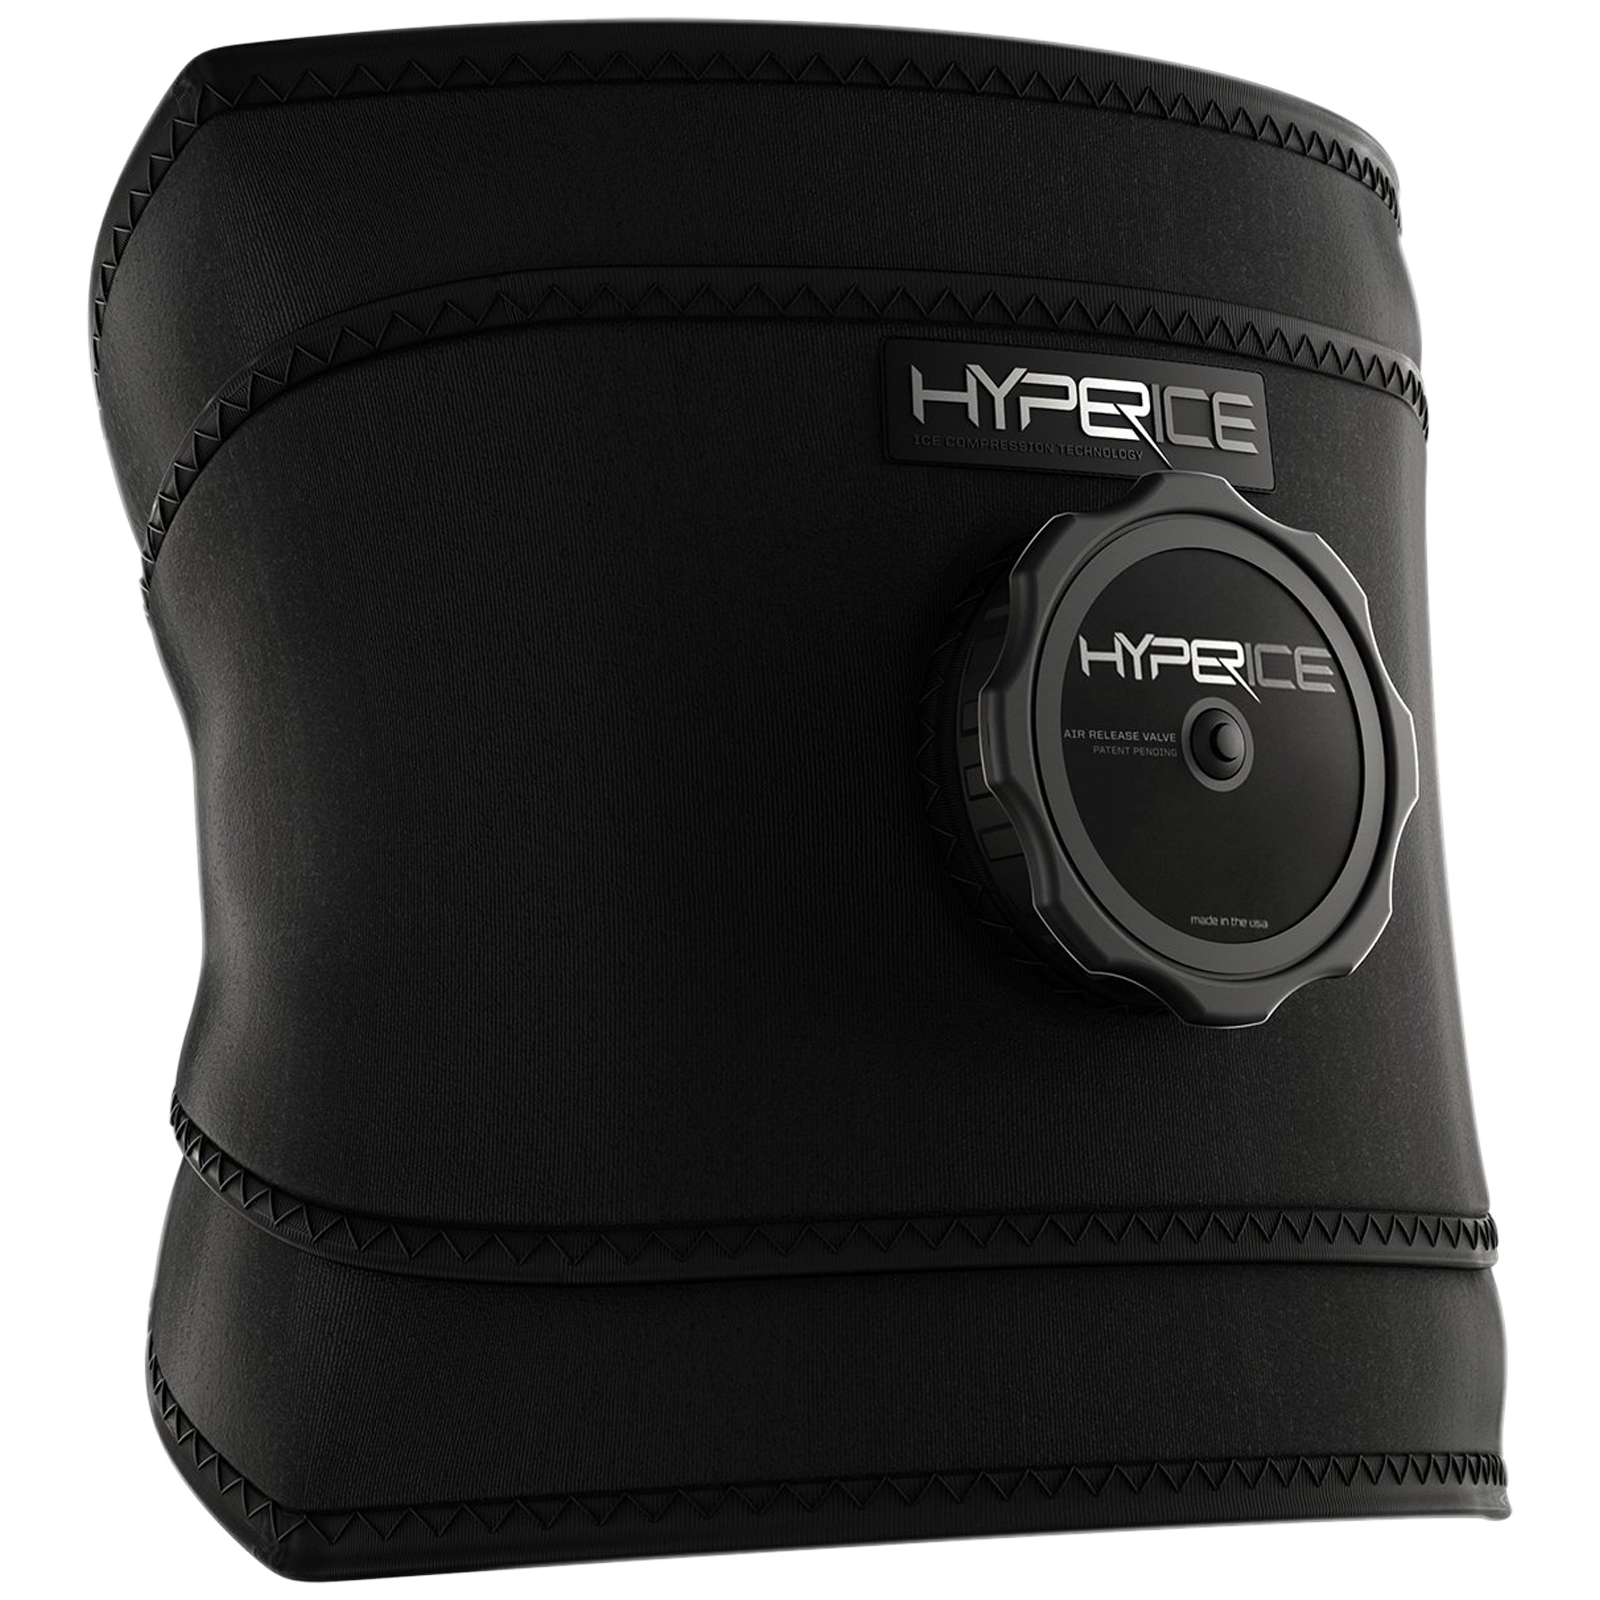 Hyperice Back Pain Reliever (Ice Compression Technology, 10040 001-00, Black)